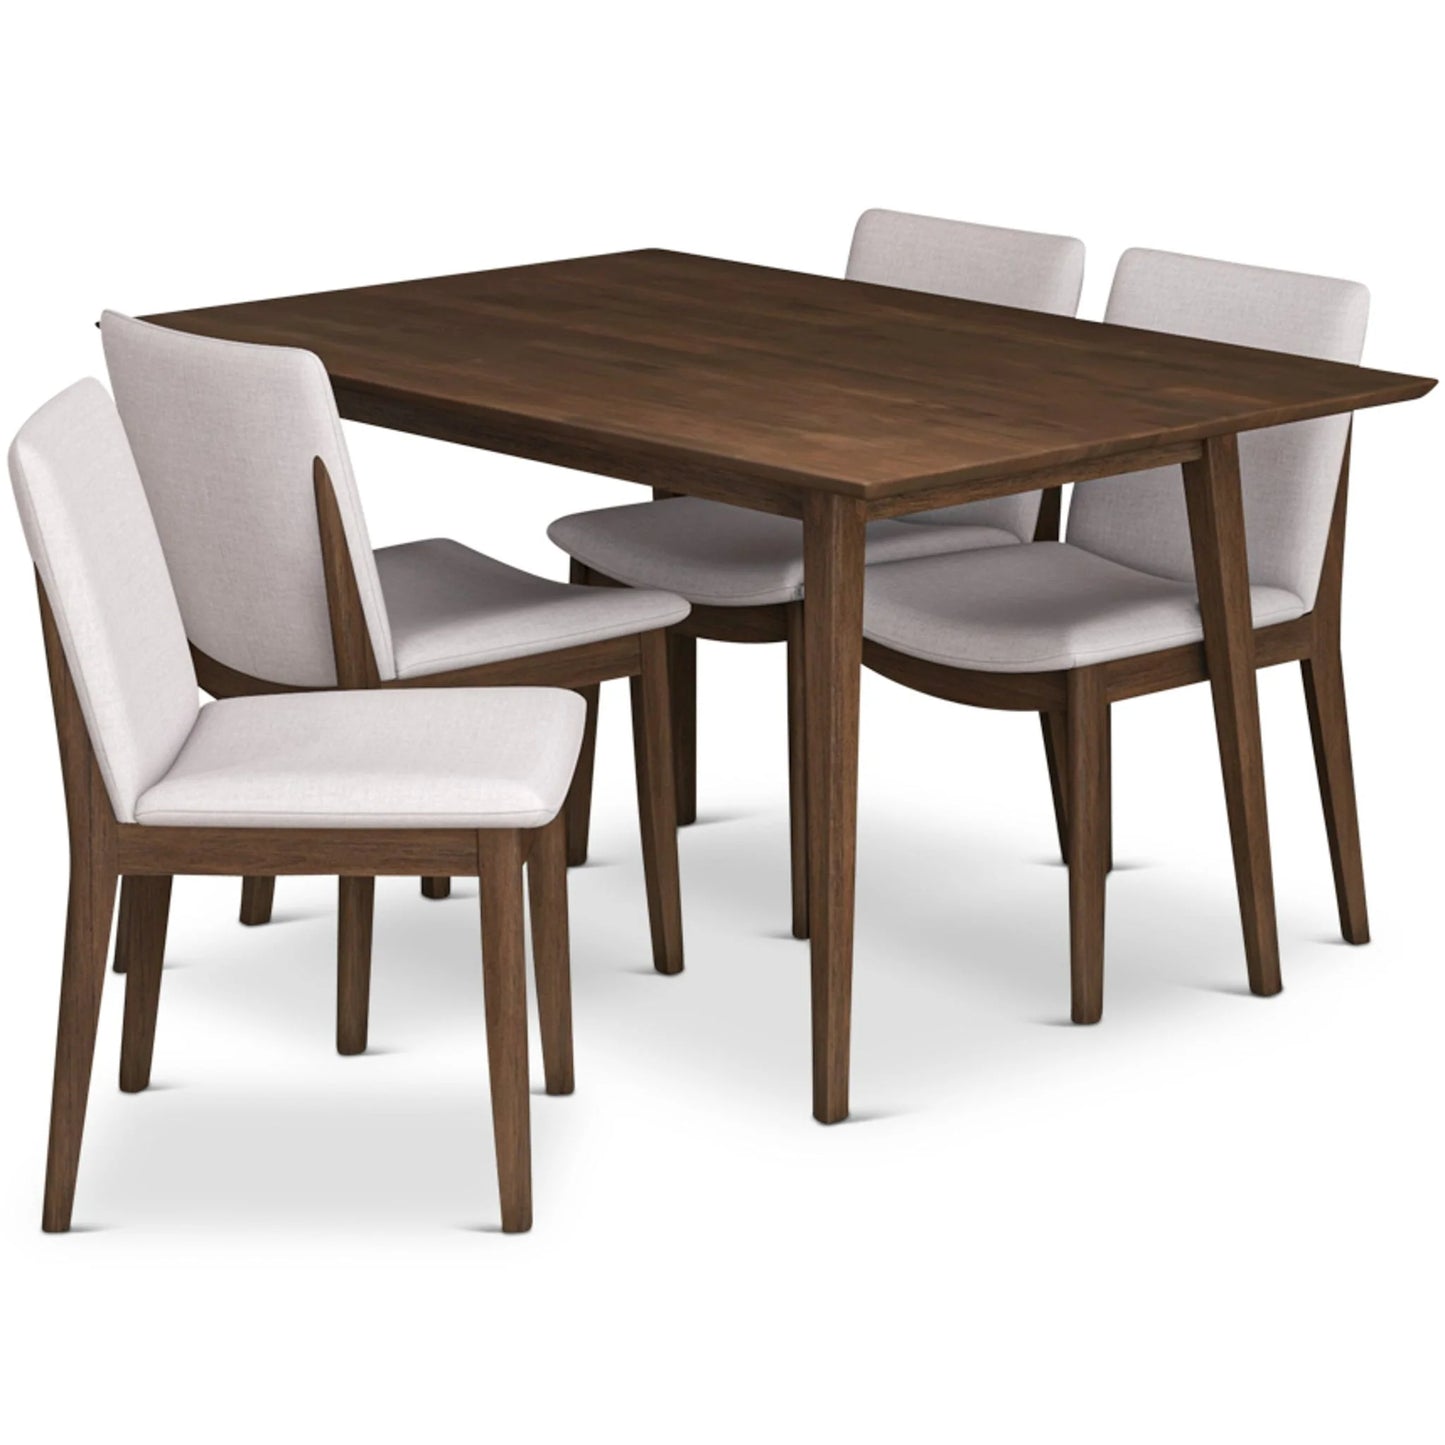 Adira (Small - Walnut) Dining Set with 4 Virginia (Beige) Dining Chairs